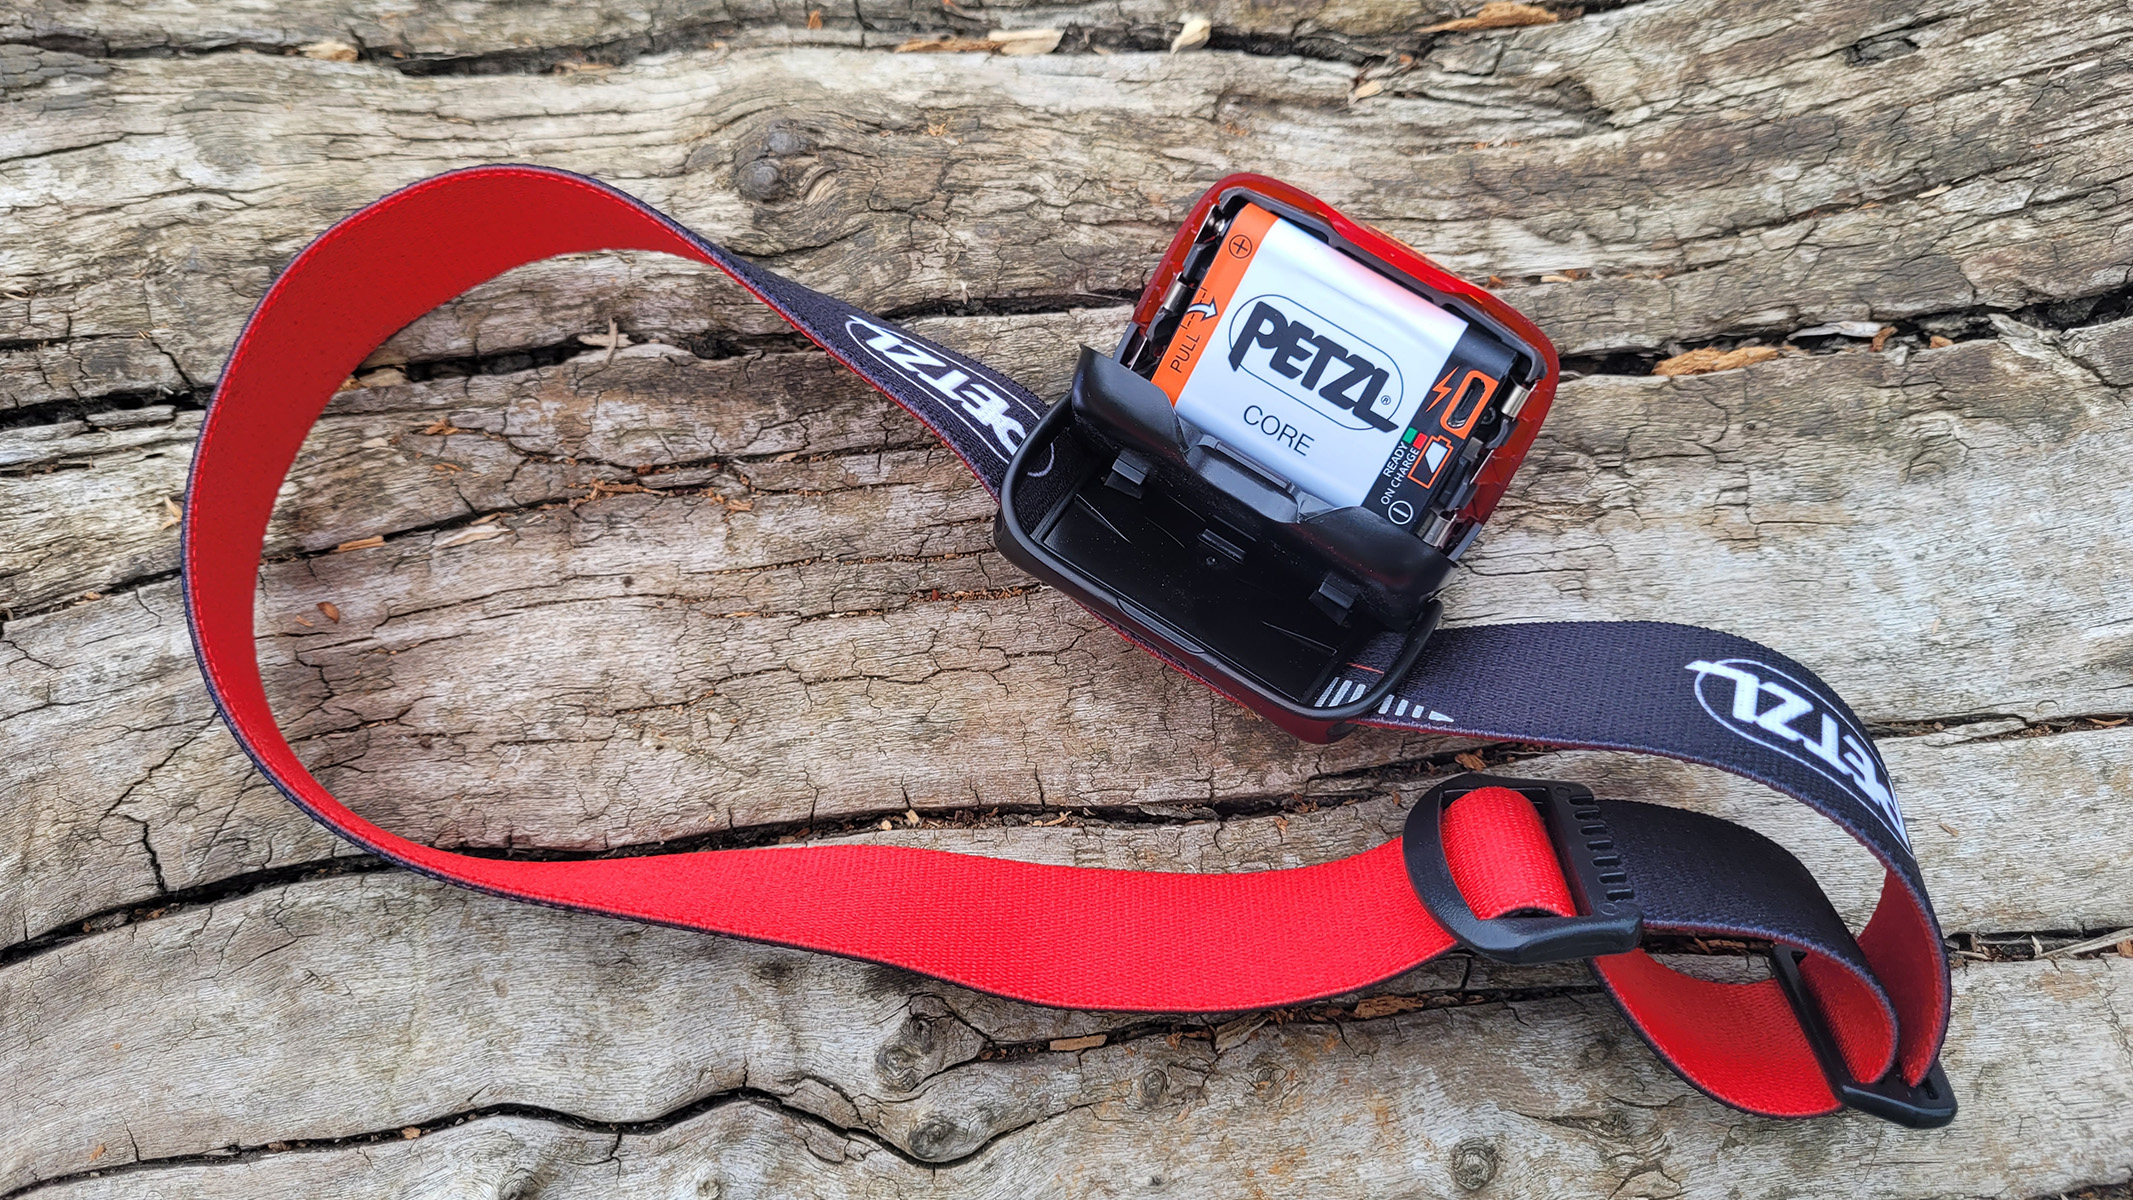 Photo of the Petzl Actik Core High-capacity 1250 mAh Lithium-Ion rechargeable battery